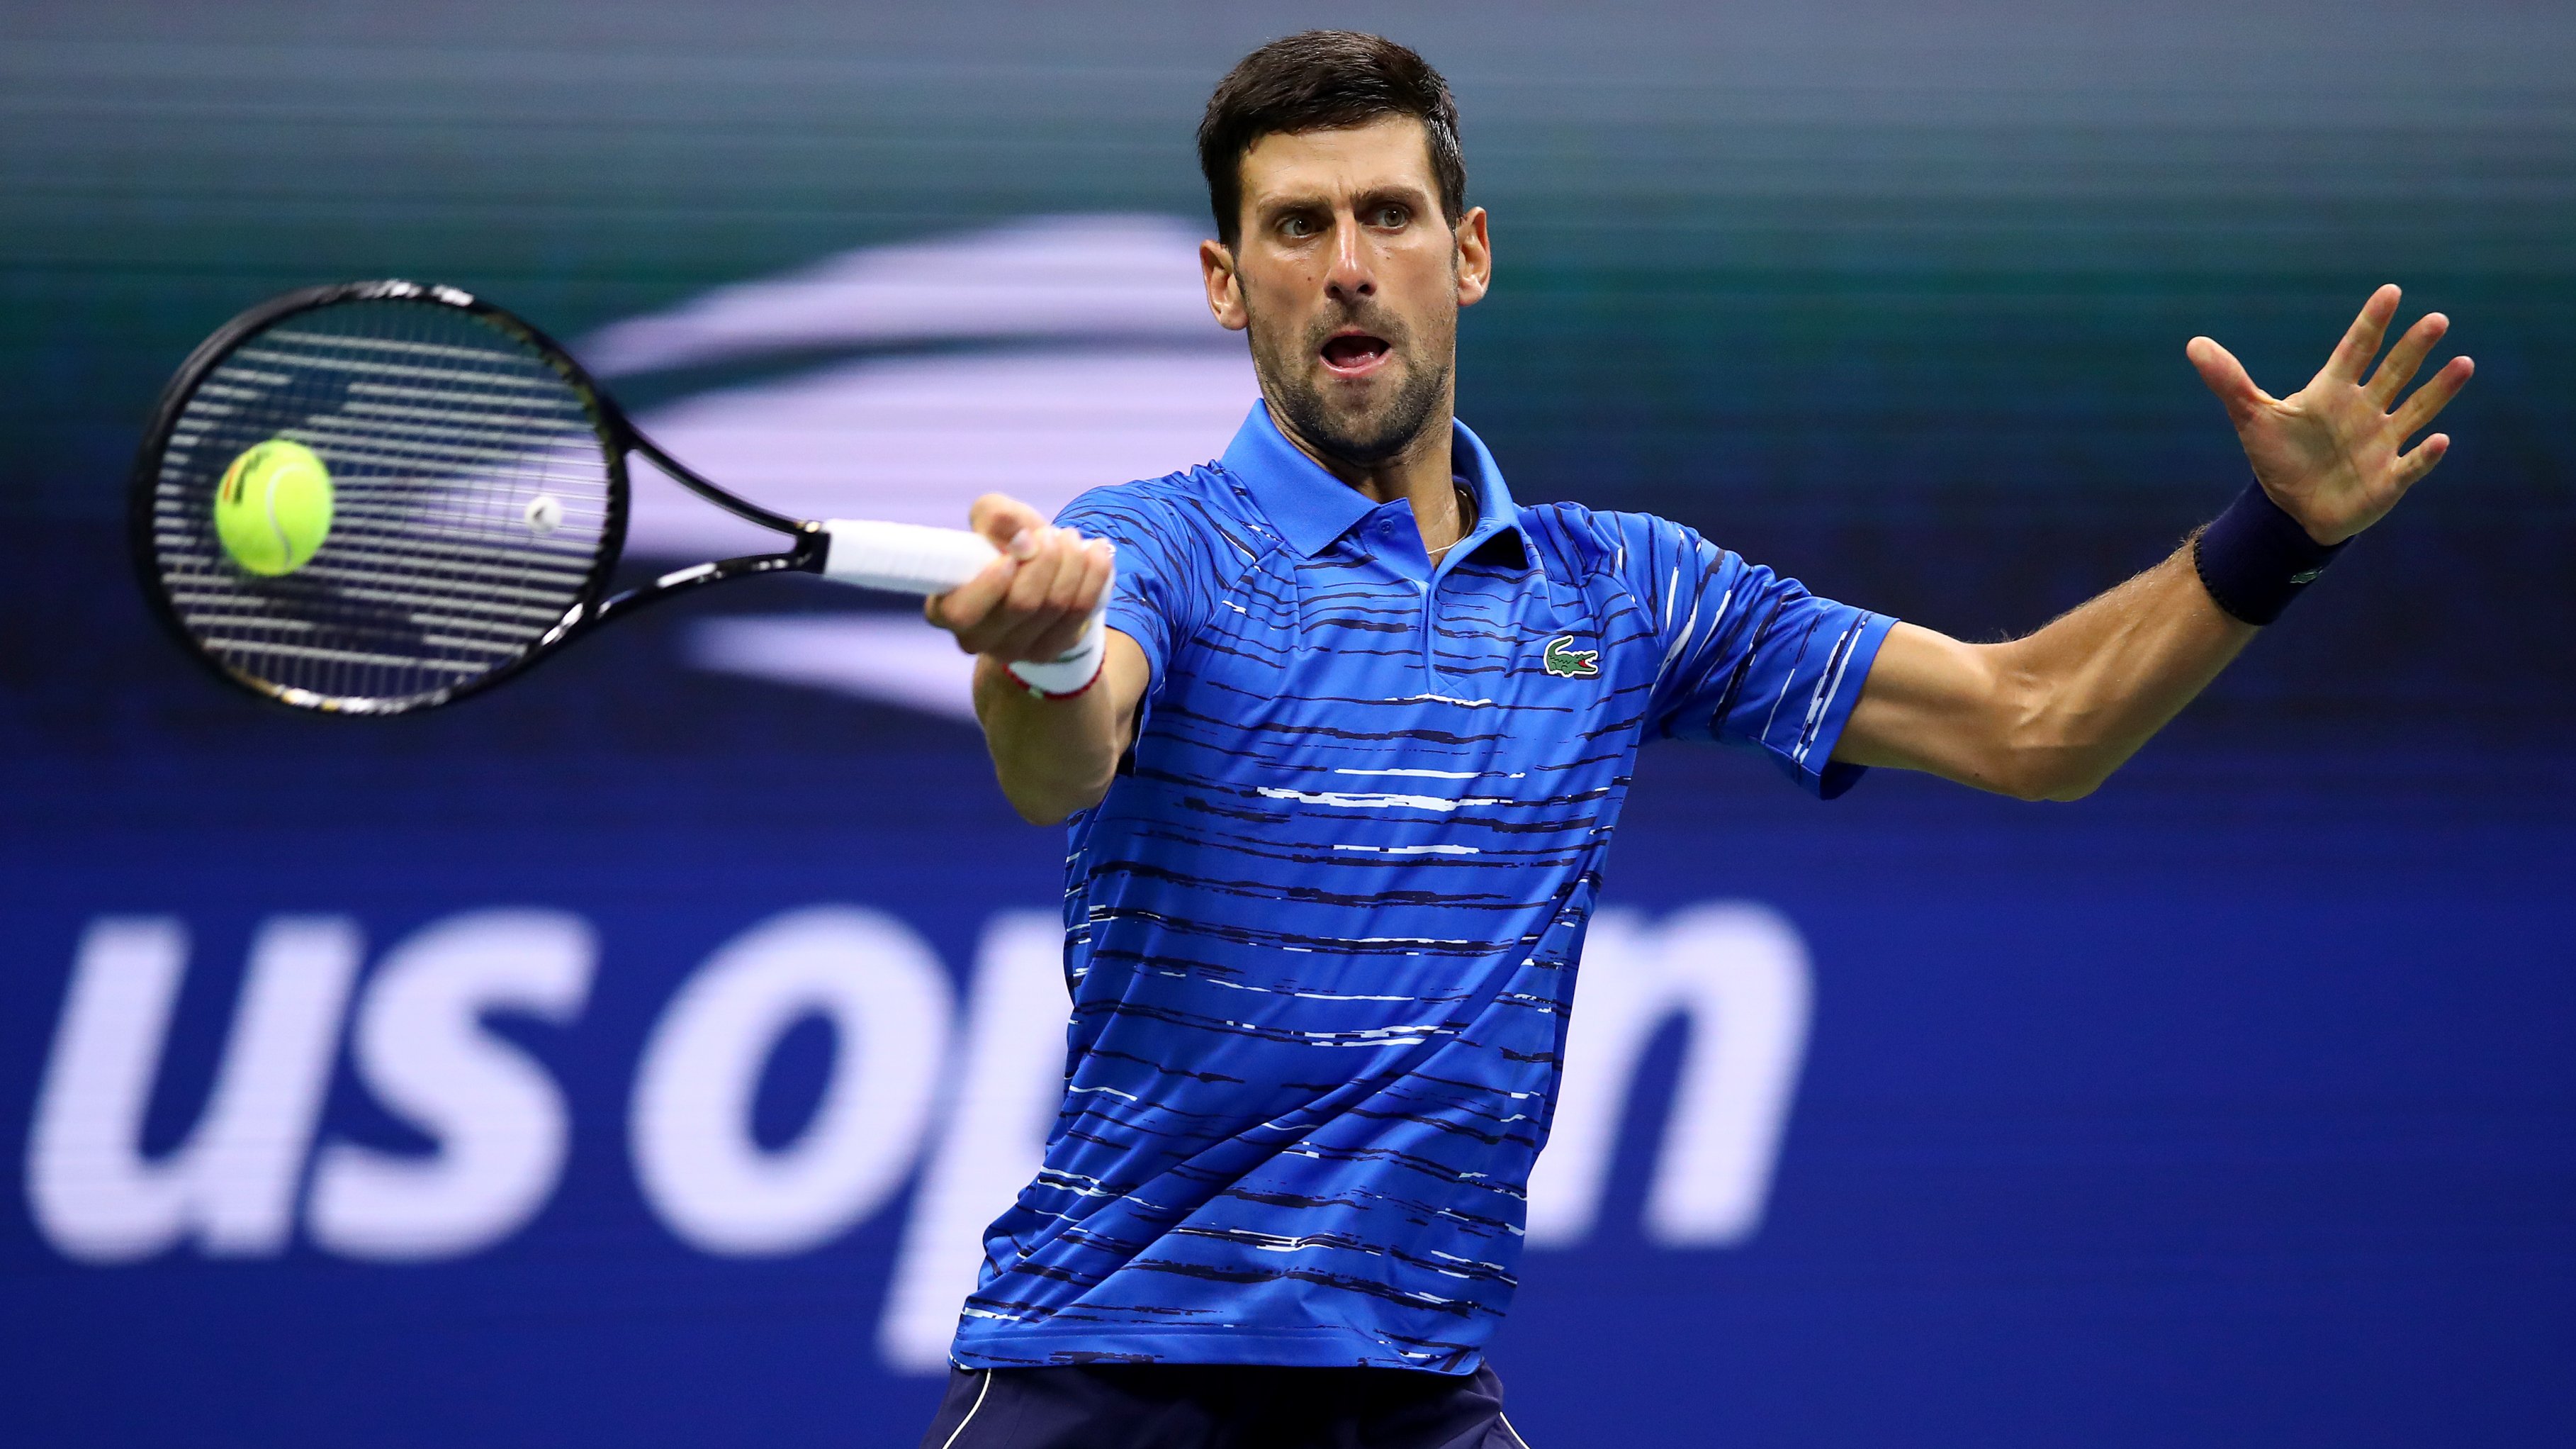 US Open Very Hopeful Unvaccinated Novak Djokovic Can Play in 2023